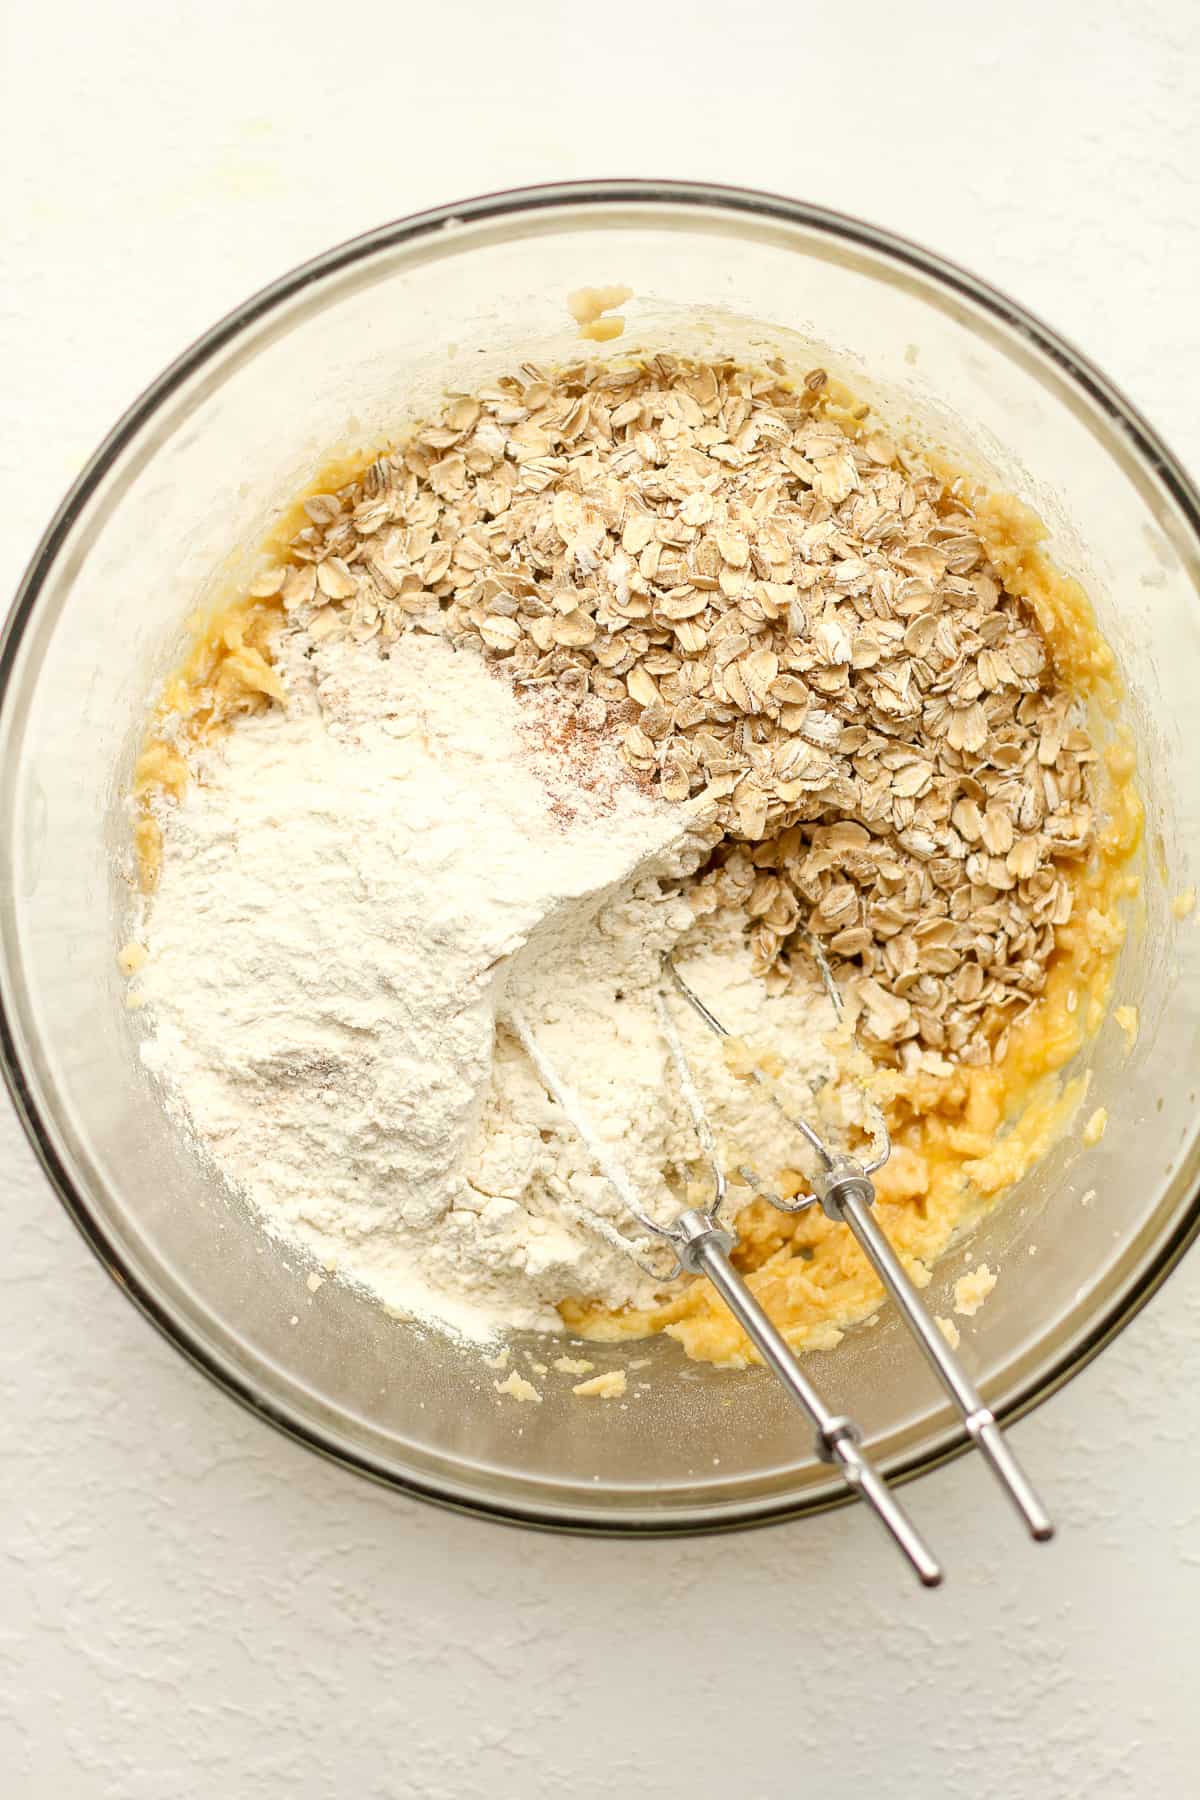 A bowl of wet ingredients with the oatmeal and flour on top.